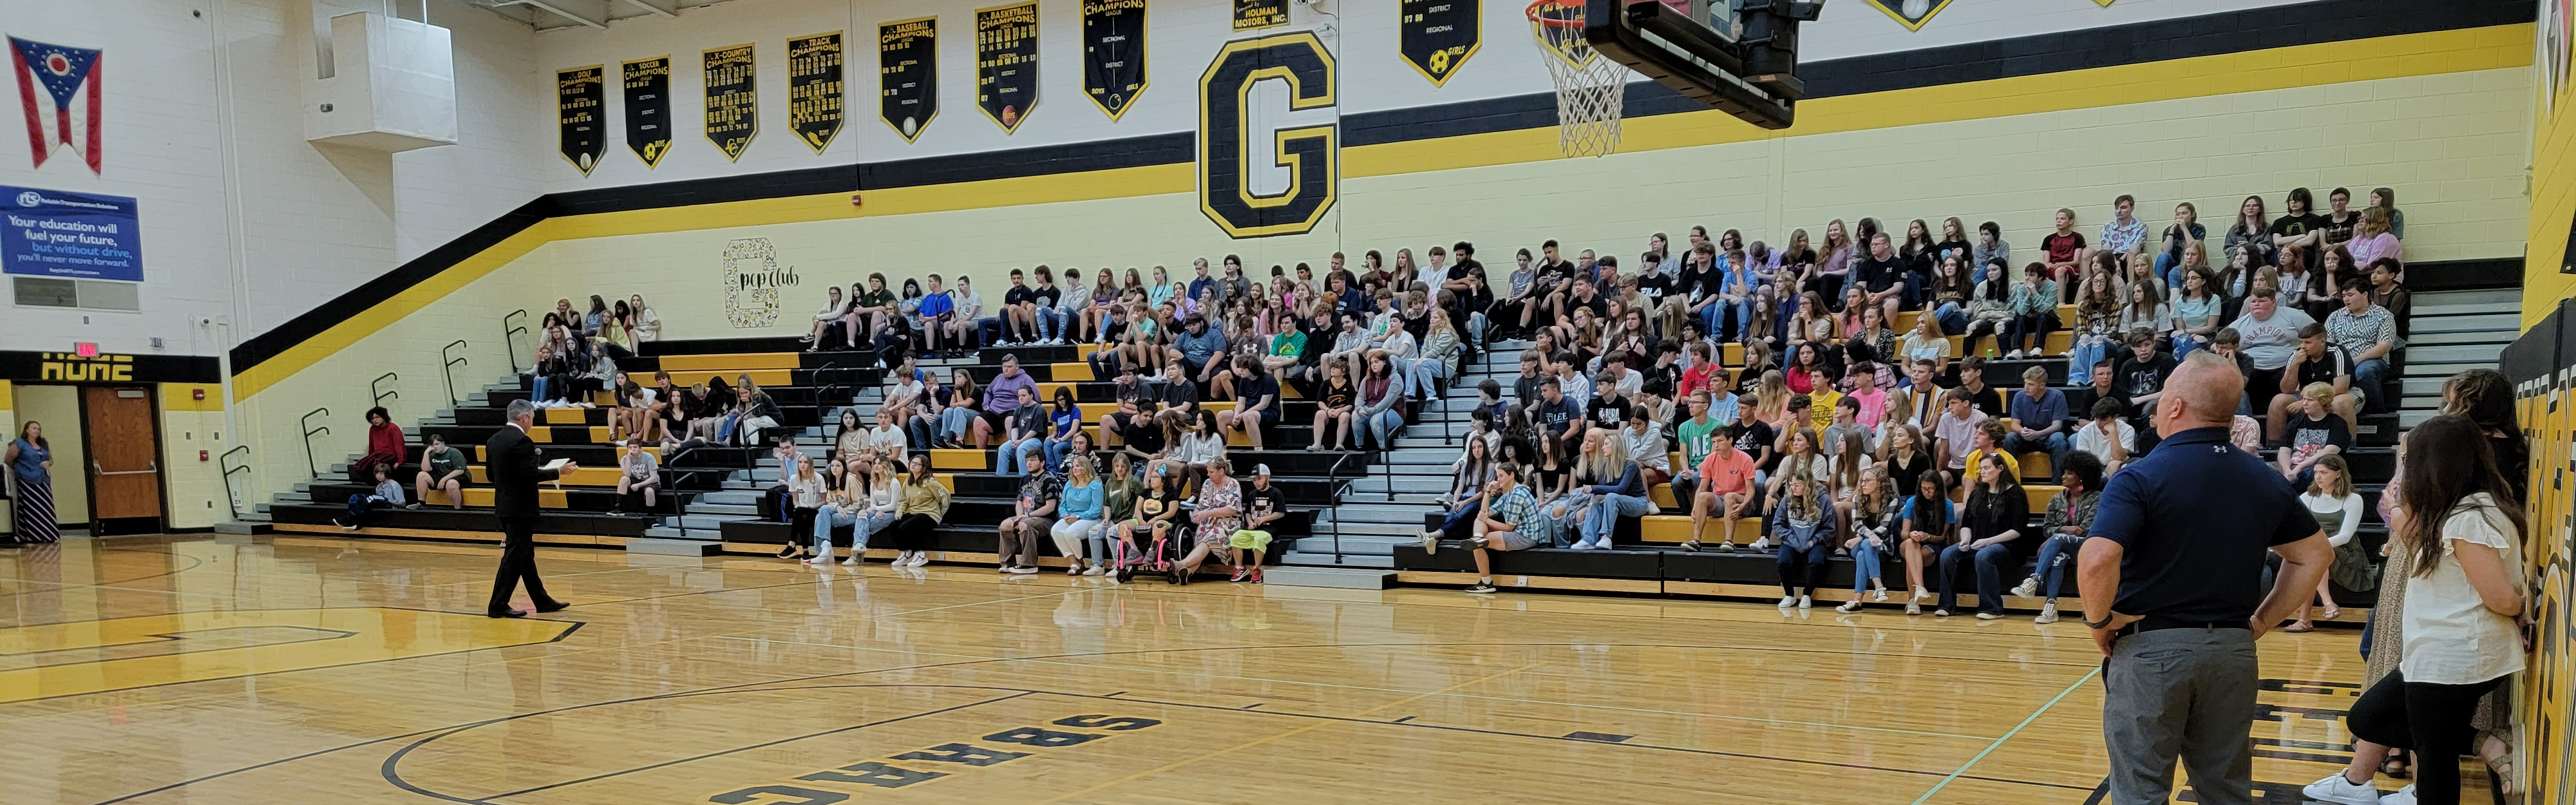 Jr-Sr High School Principal, Jerry Underwood, welcoming students for the 2022-2023 school year. WELCOME BACK STUDENTS! #IgniteInspireInstill